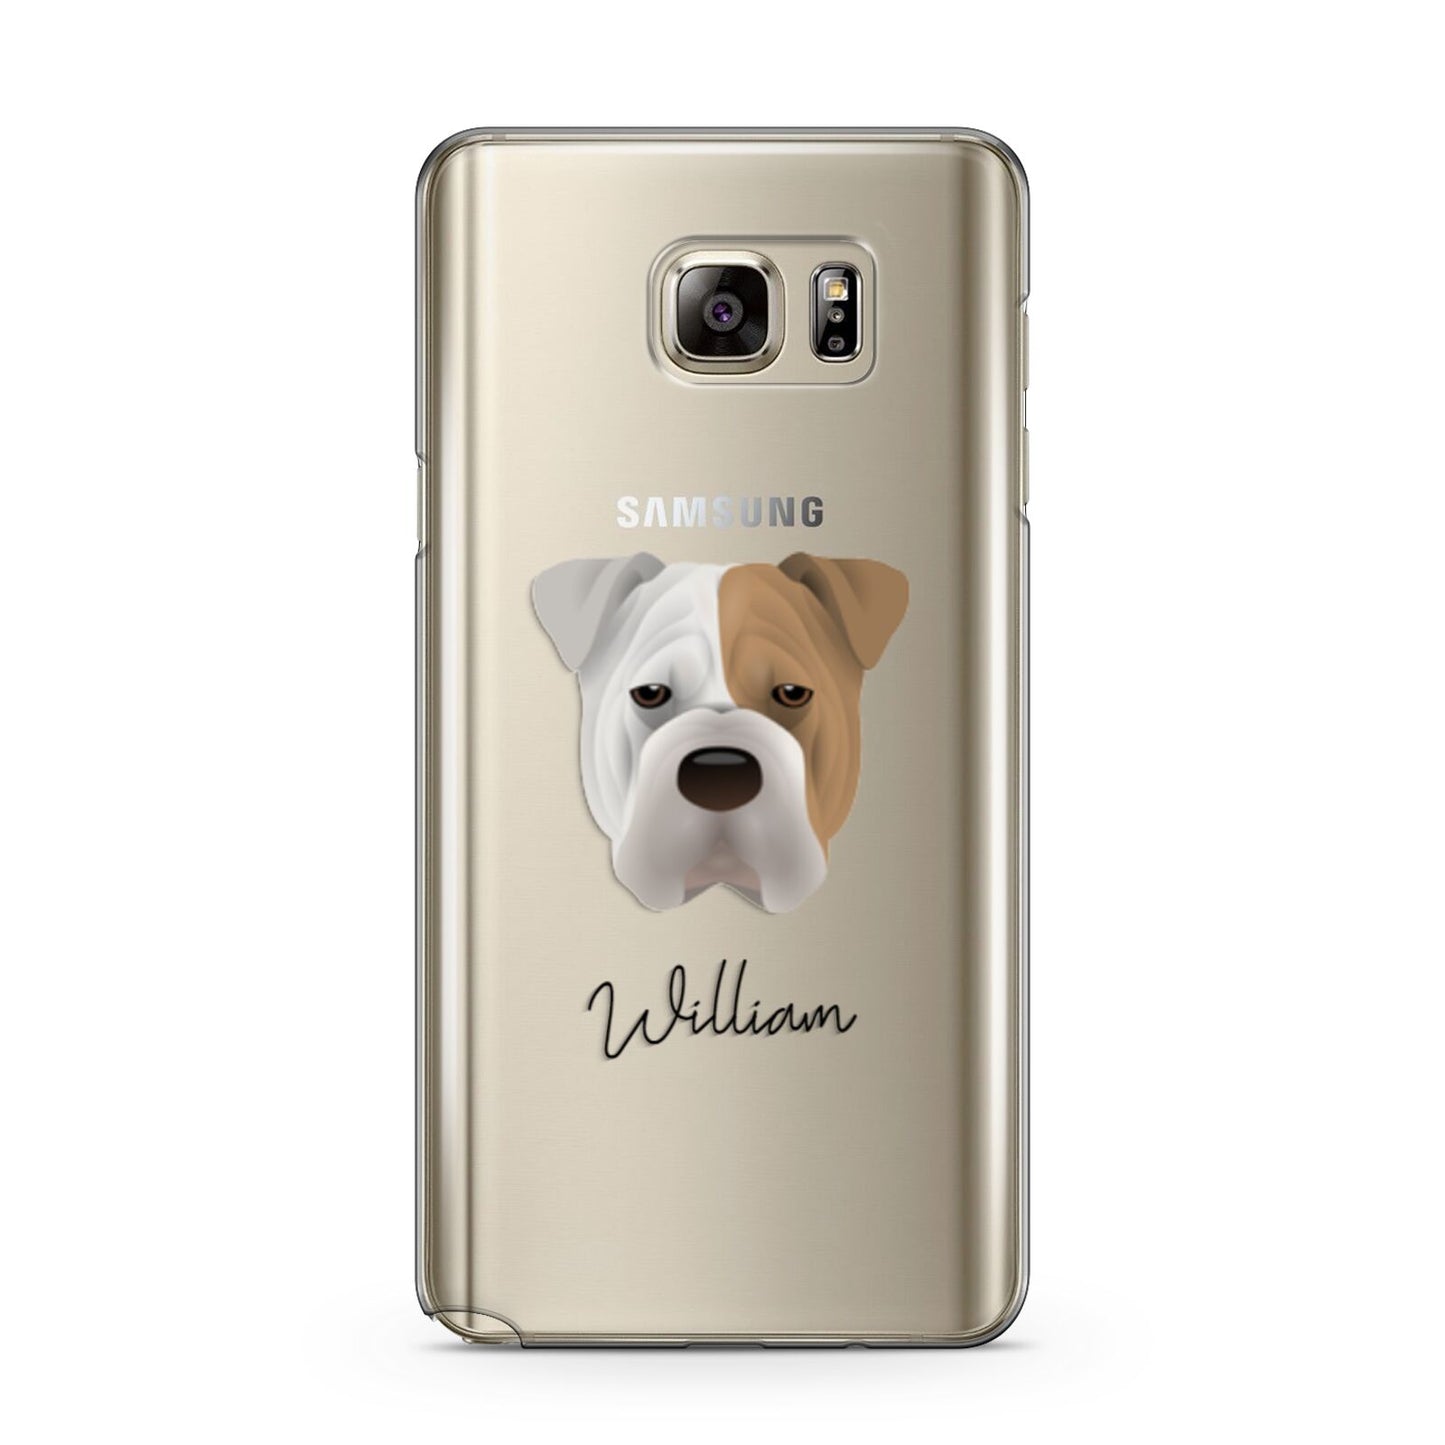 Bull Pei Personalised Samsung Galaxy Note 5 Case